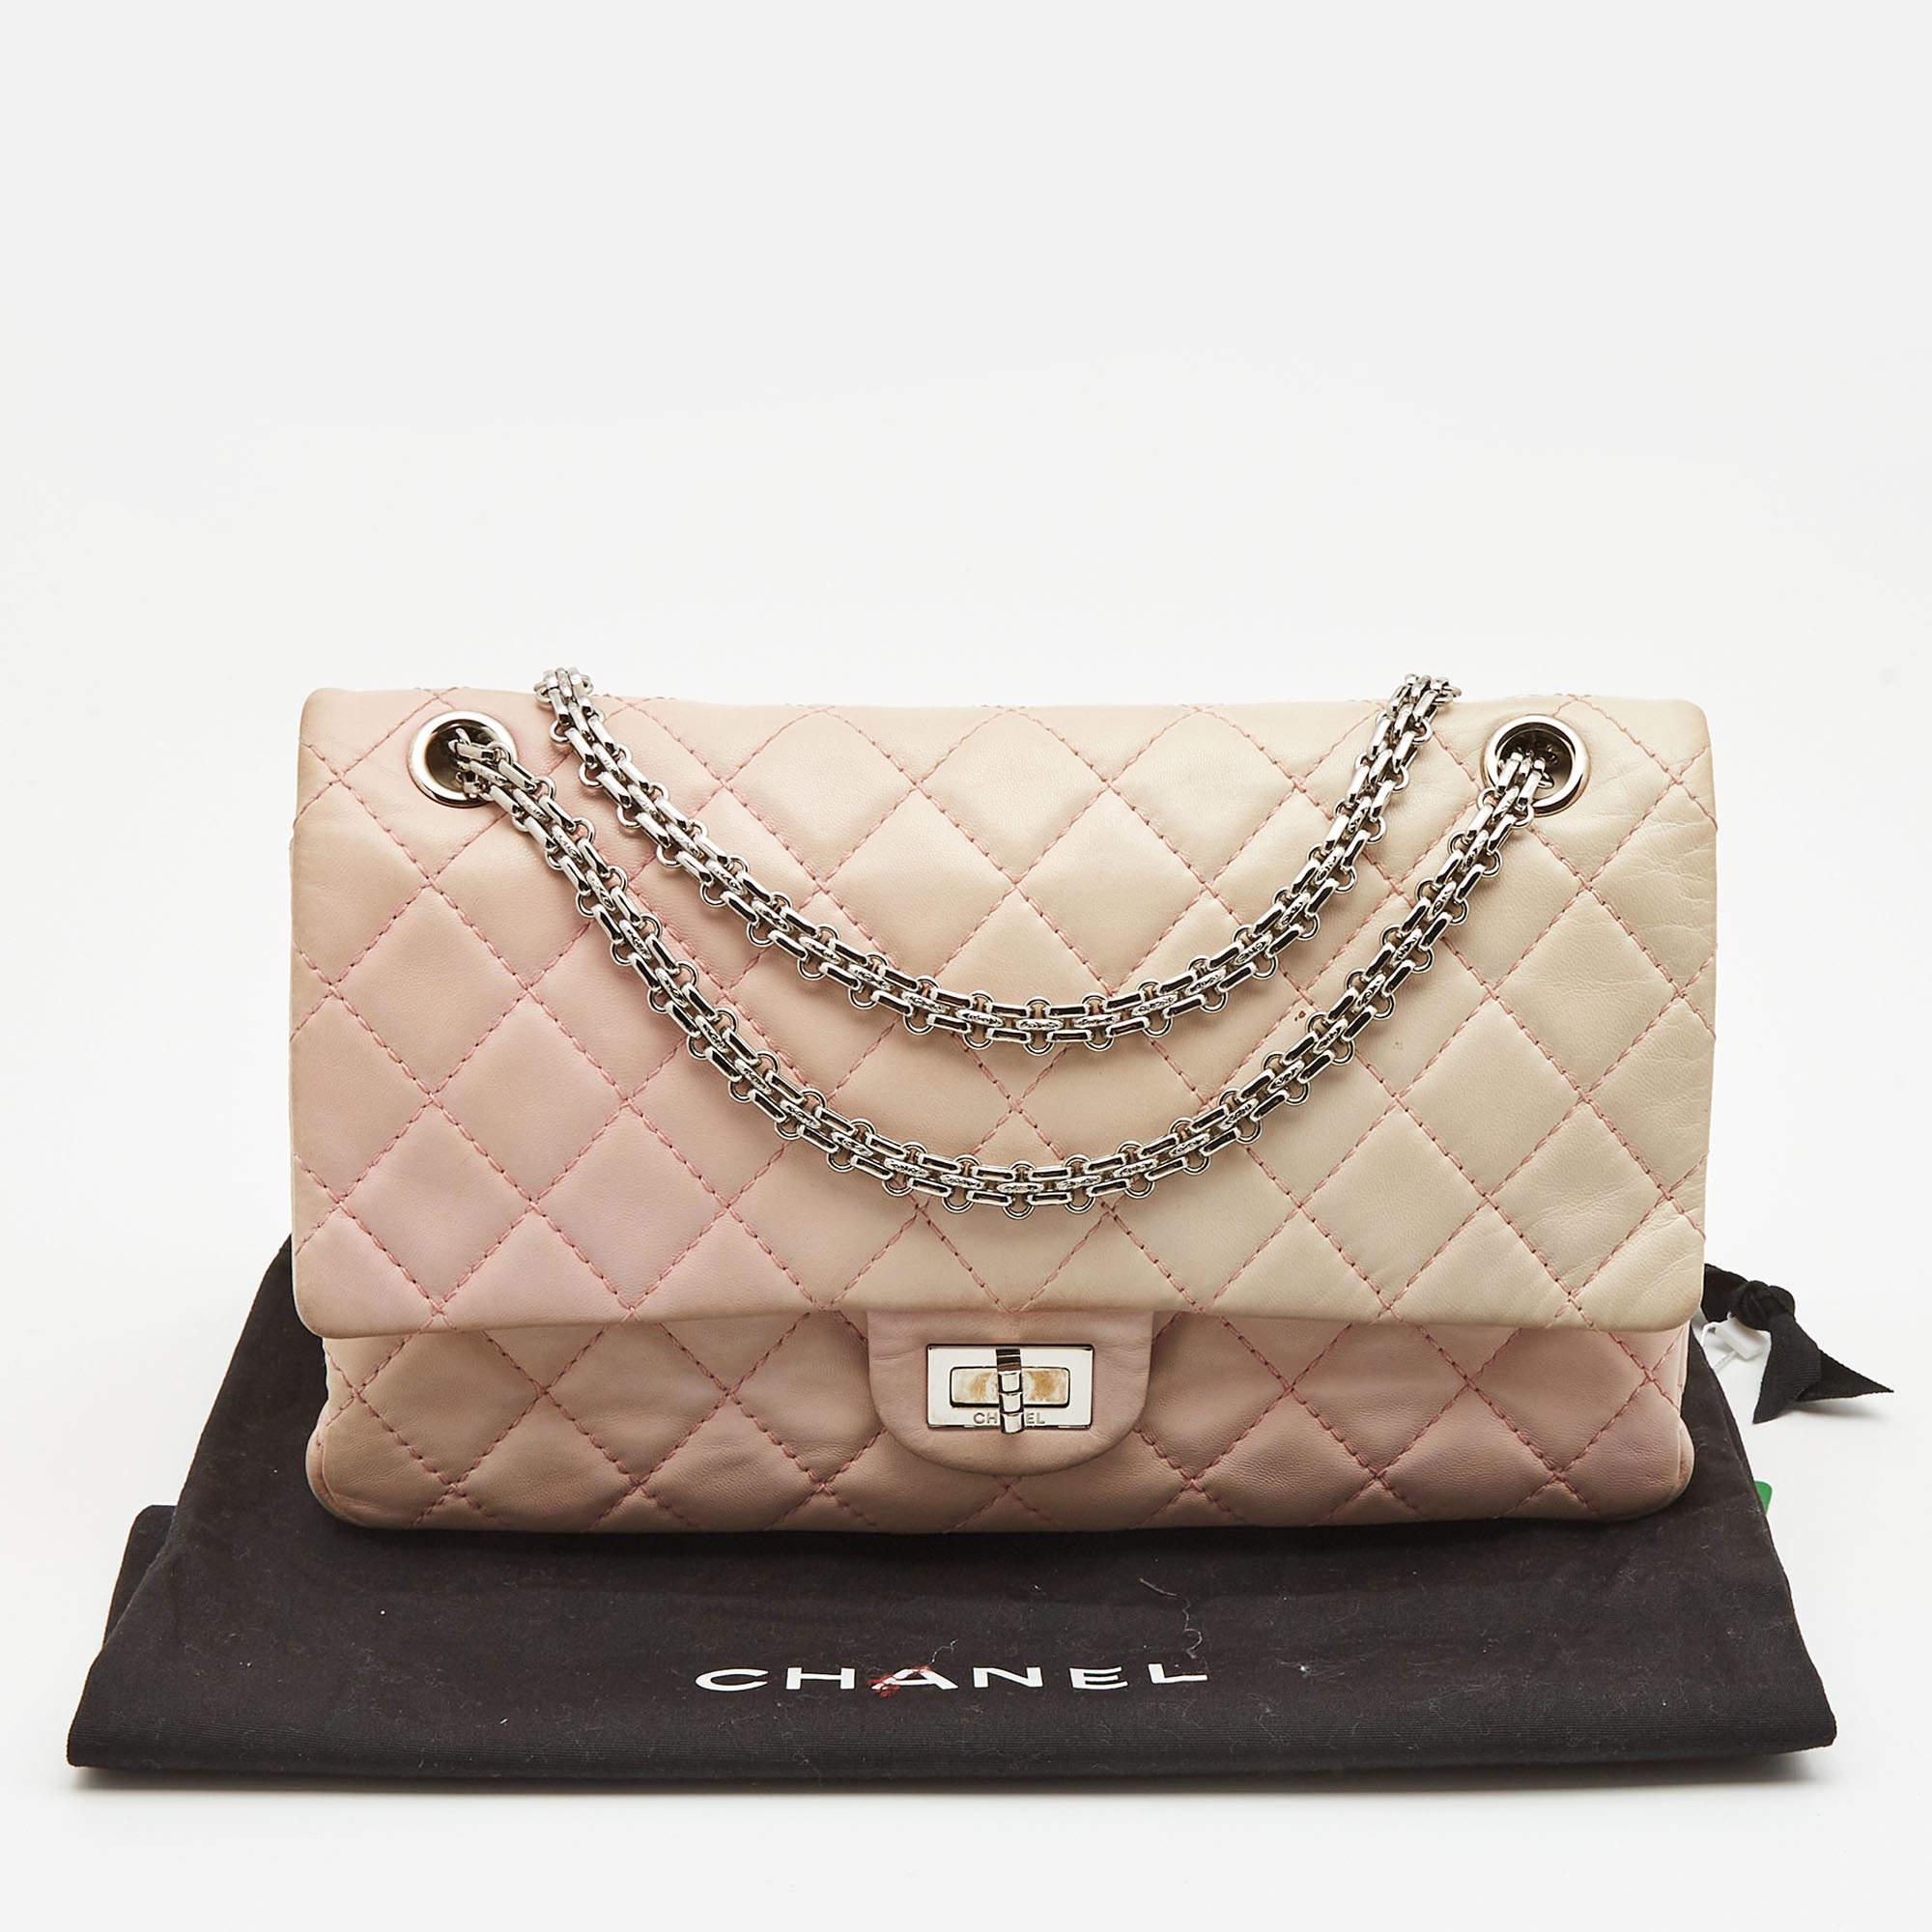 Chanel Pink Ombre Quilted Leather Reissue 2.55 Classic 226 Flap Bag For Sale 3